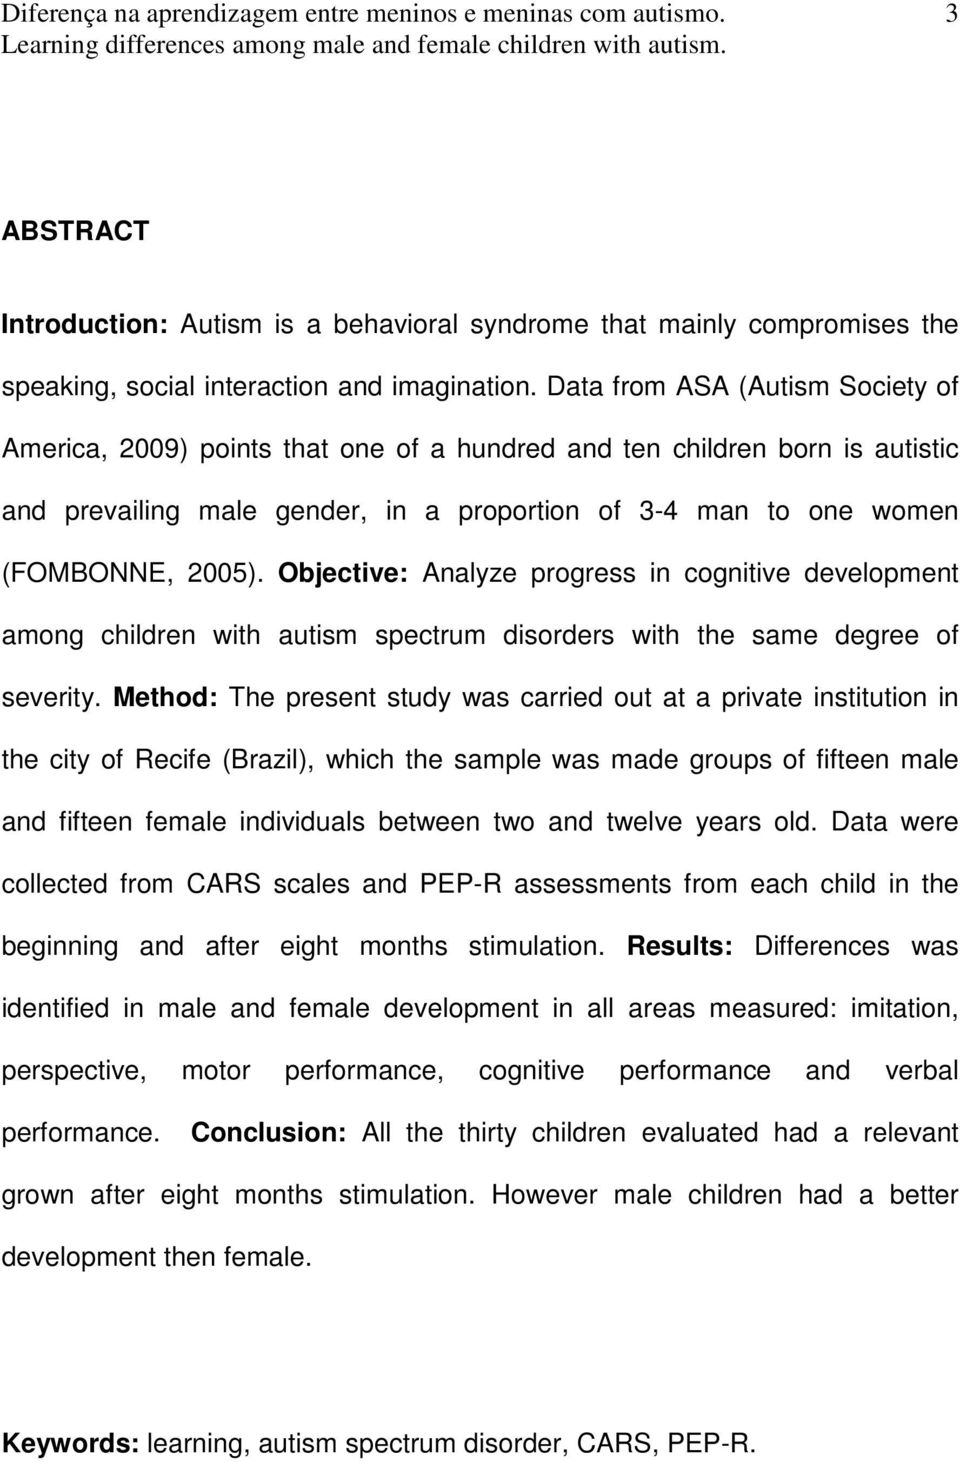 Objective: Analyze progress in cognitive development among children with autism spectrum disorders with the same degree of severity.